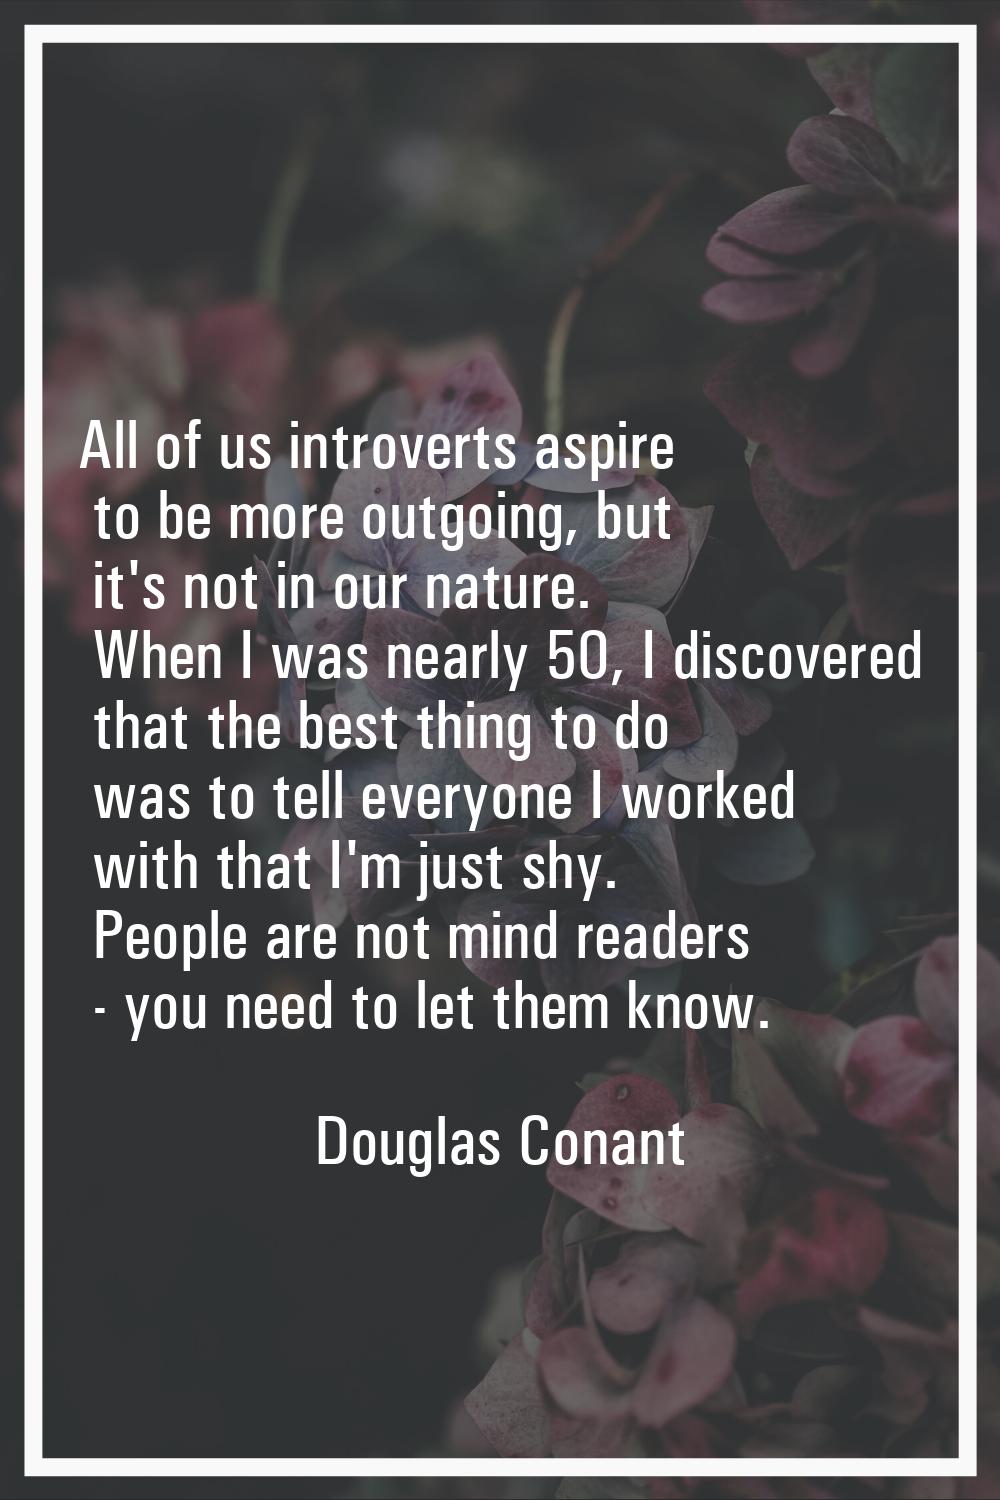 All of us introverts aspire to be more outgoing, but it's not in our nature. When I was nearly 50, 